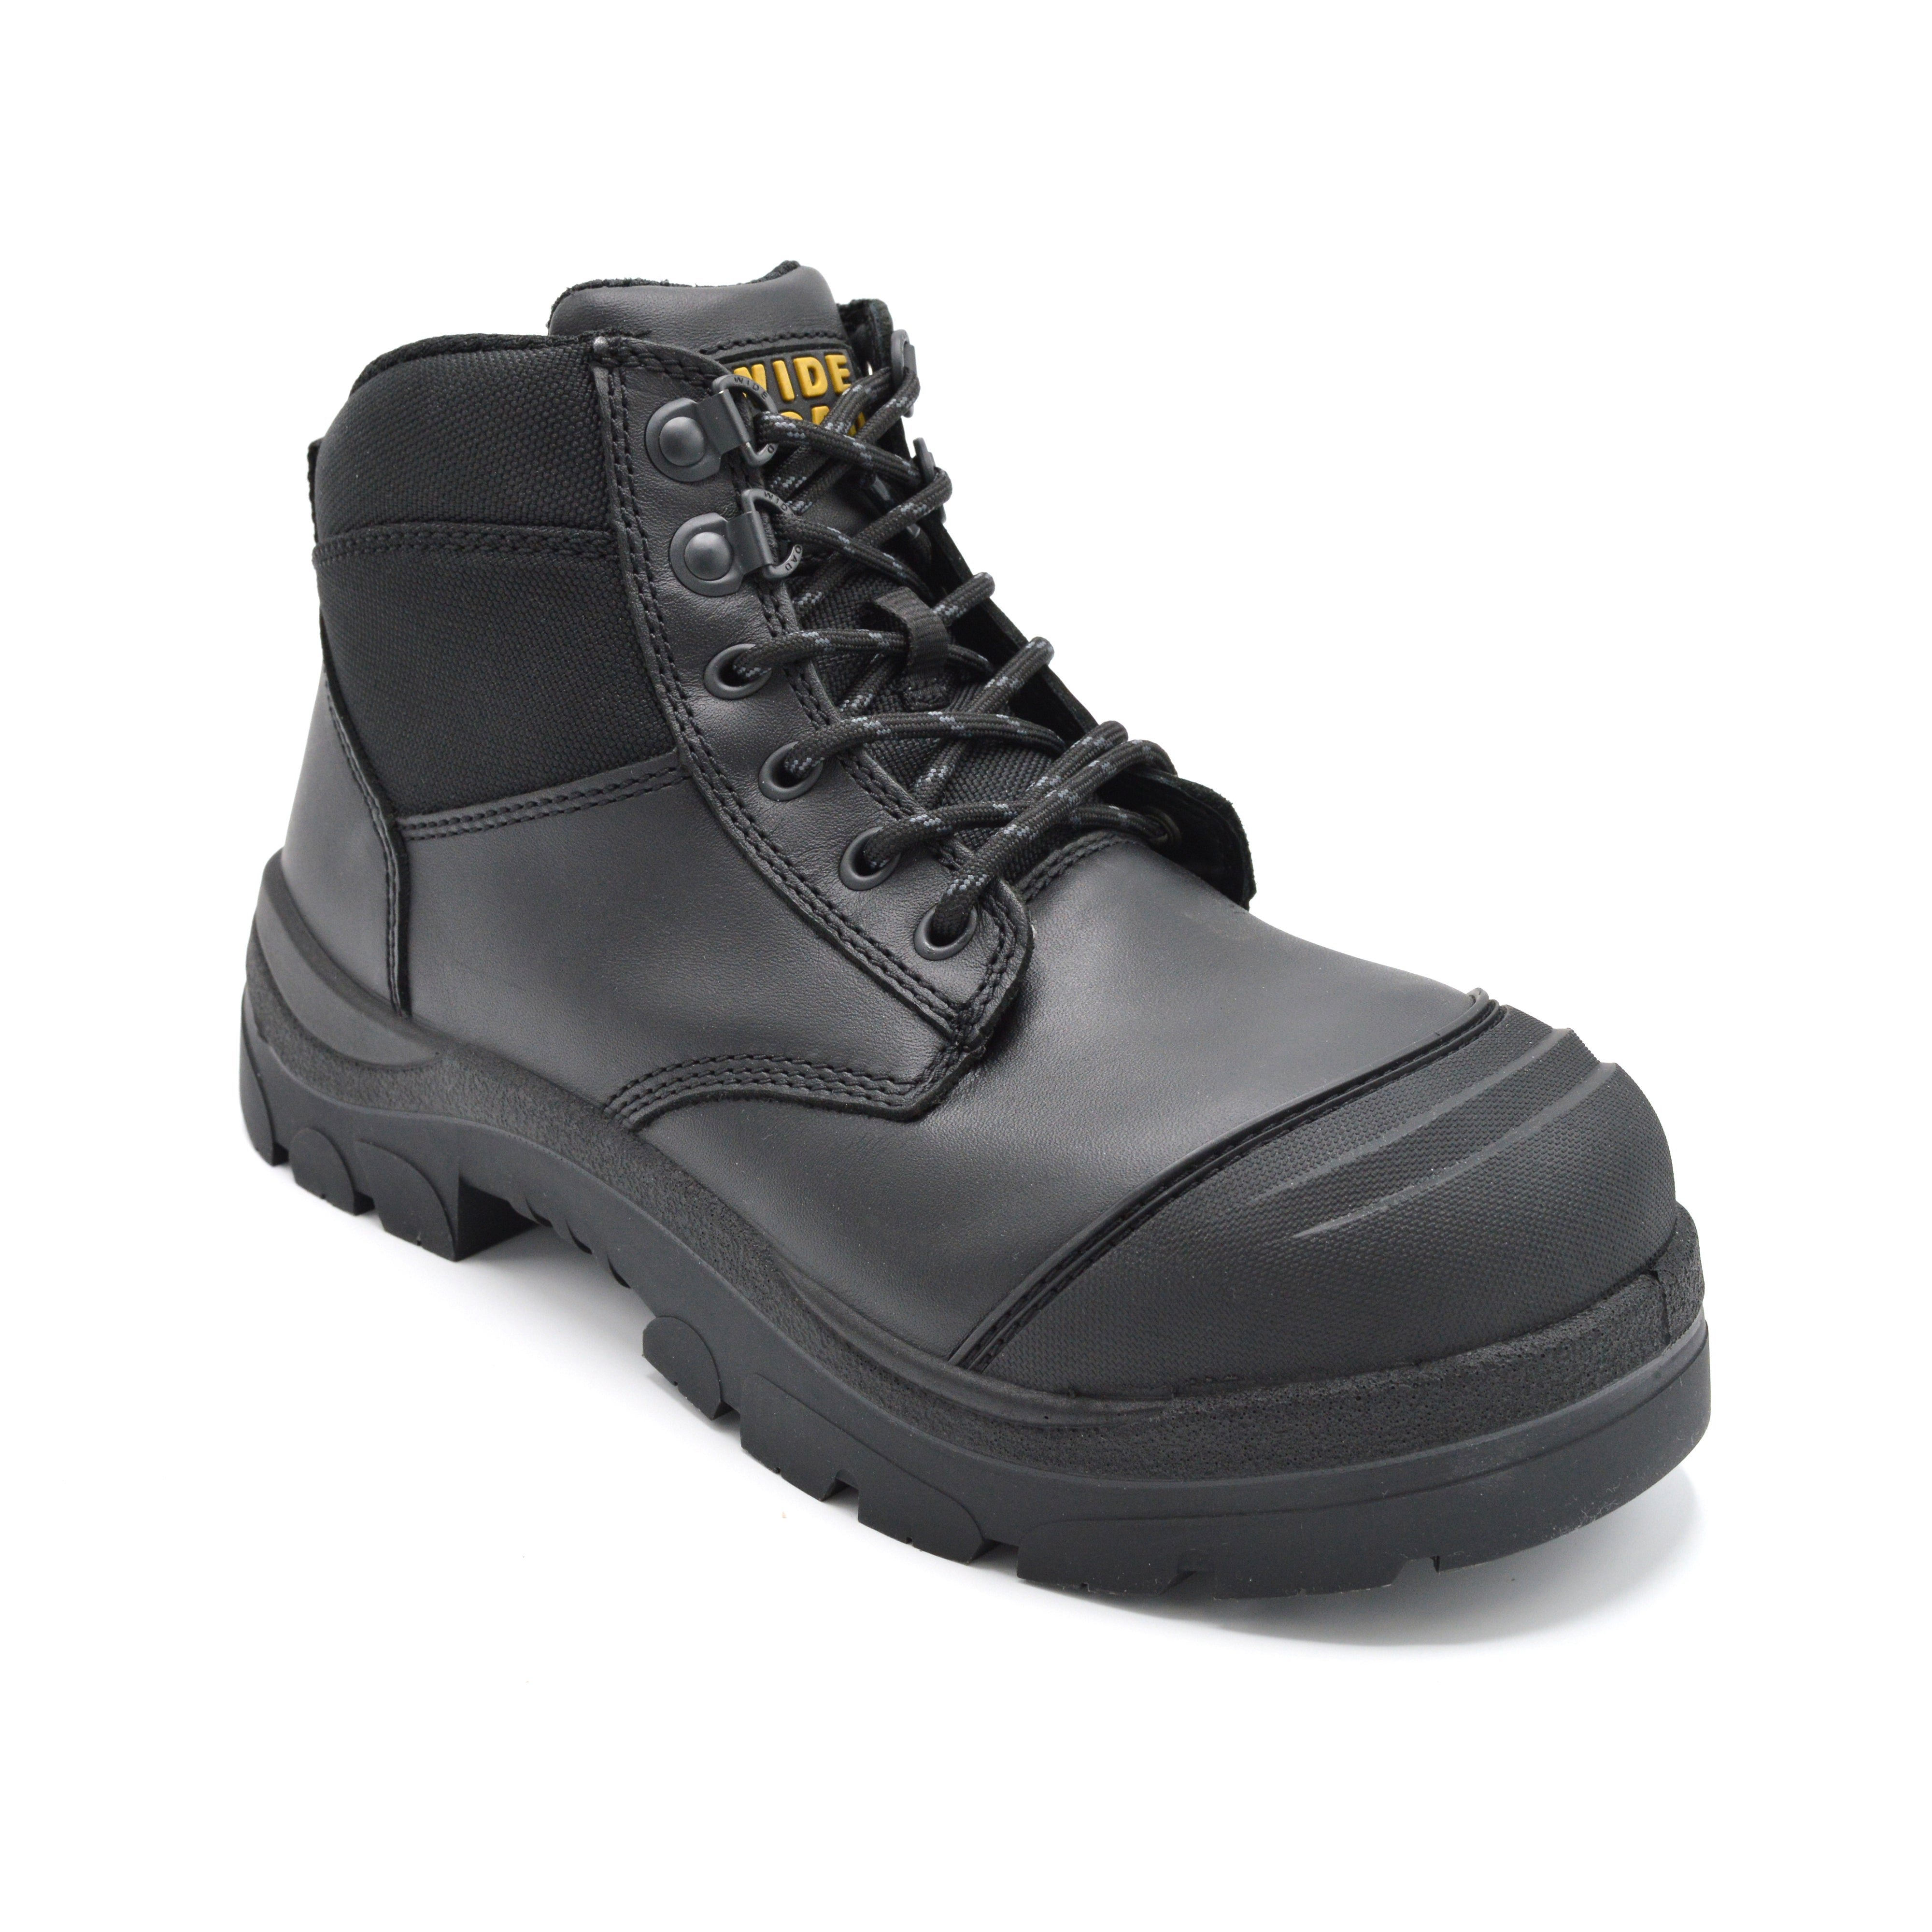 WideLoad 690BLWC - Extra Wide S3 Composite Toe Safety Boot No Zip  - Airport Friendly - 6E Fit  - Black